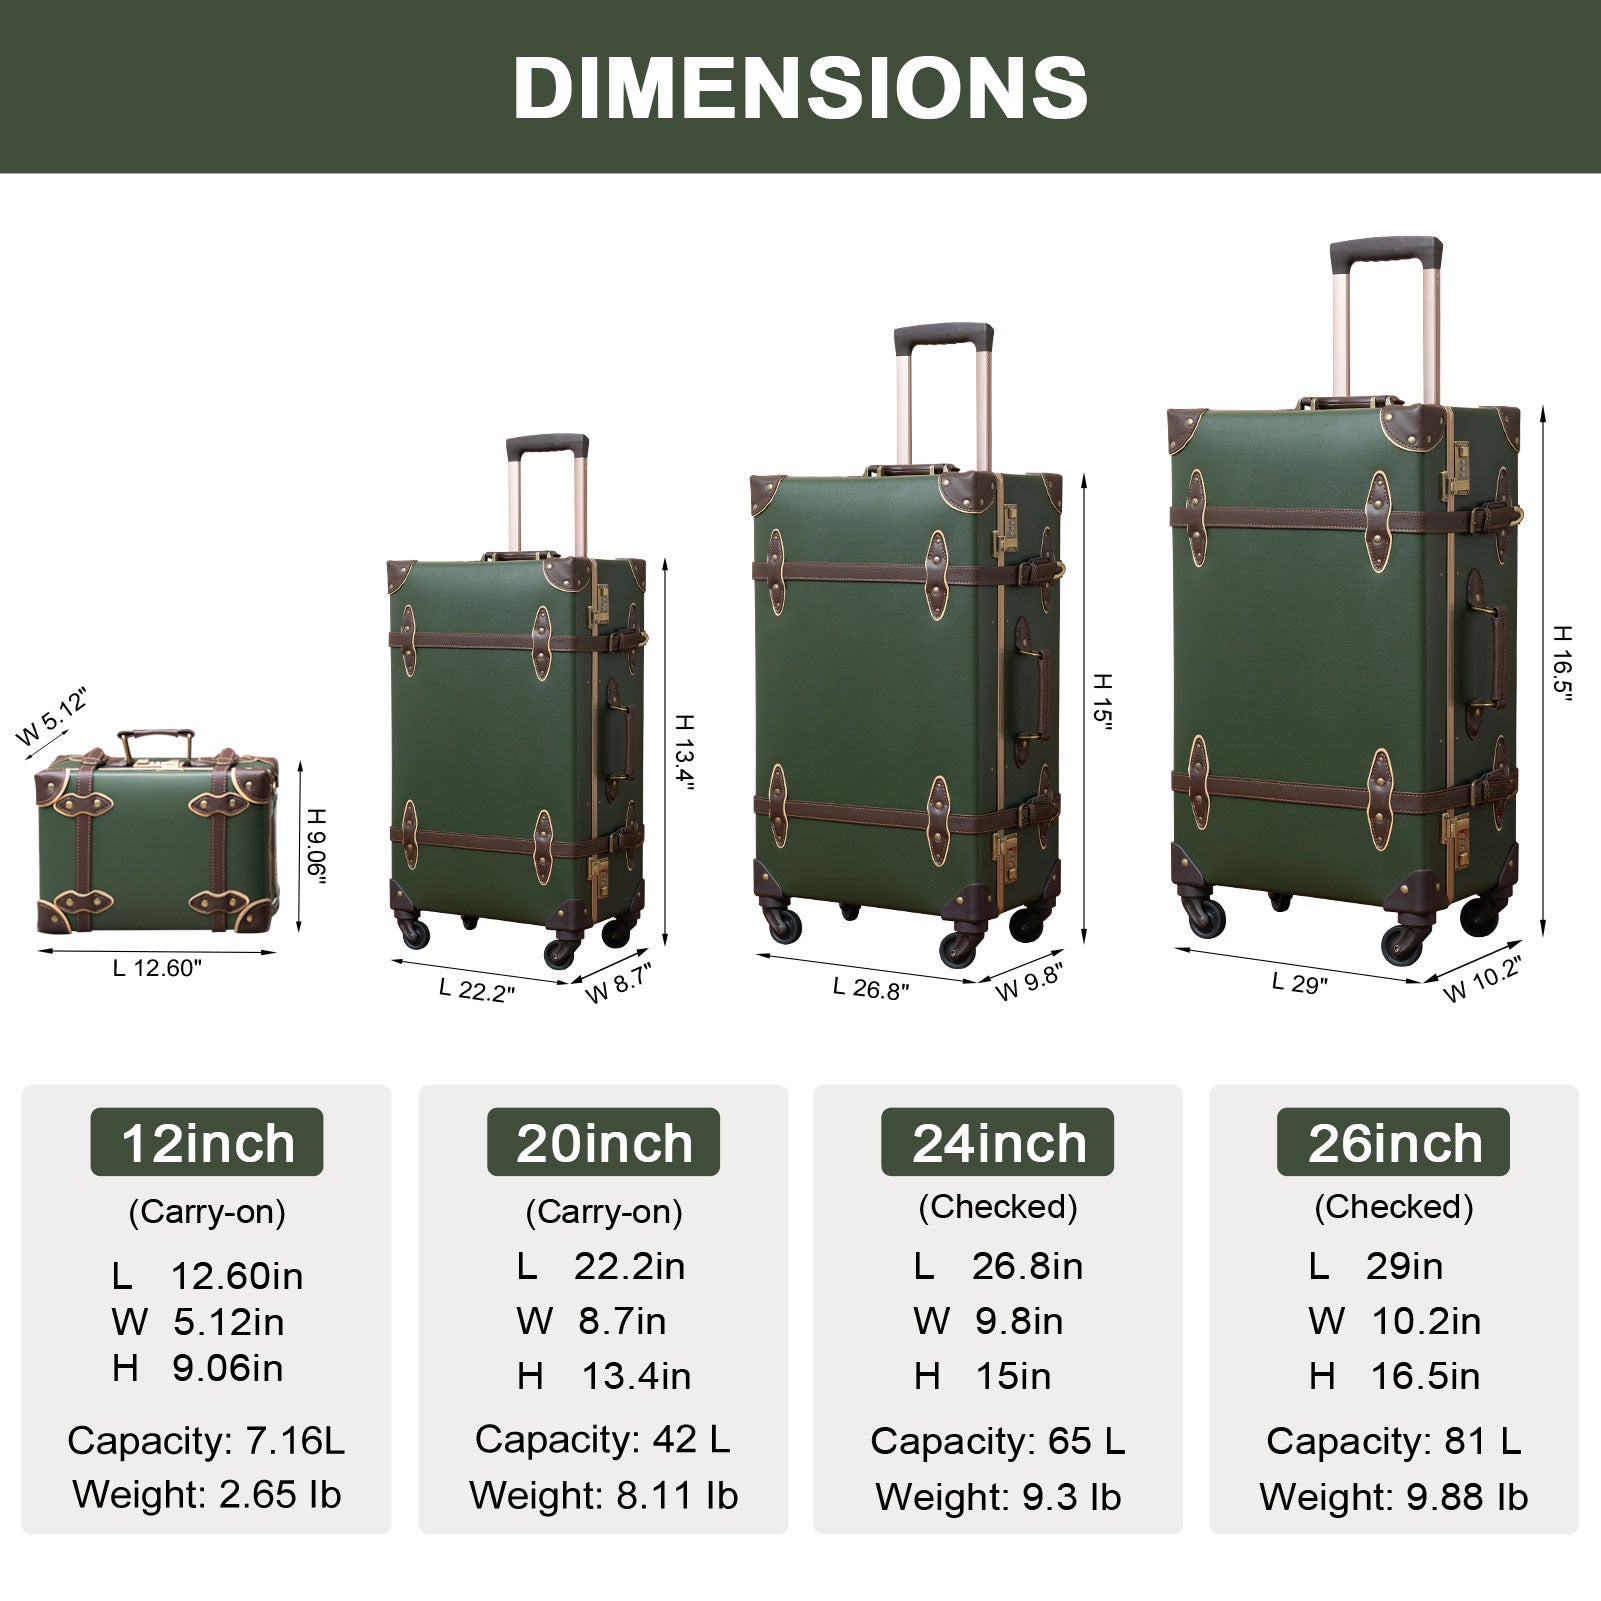 urecity Vintage Luggage Sets of 3 Piece - Hardside Lightweight Spinner  Suitcases - Retro Travel Set includes Under Seat Train Case, 26+20+12  (Army